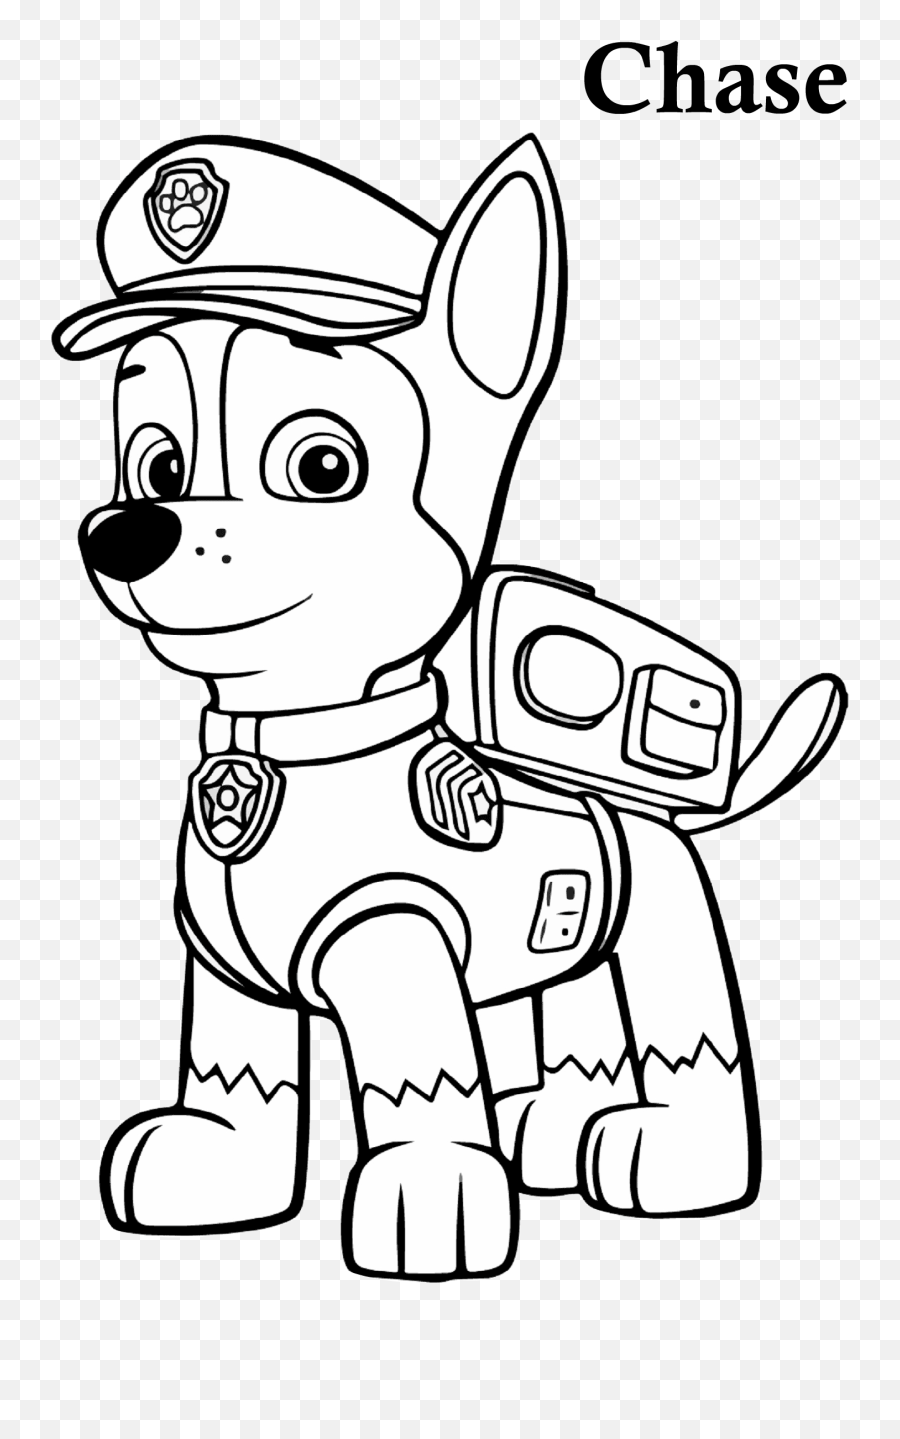 Tremendous Paw Patrol Coloring Pages - Chase Paw Patrol Colouring Emoji,Printable Emojis Coloring Pages